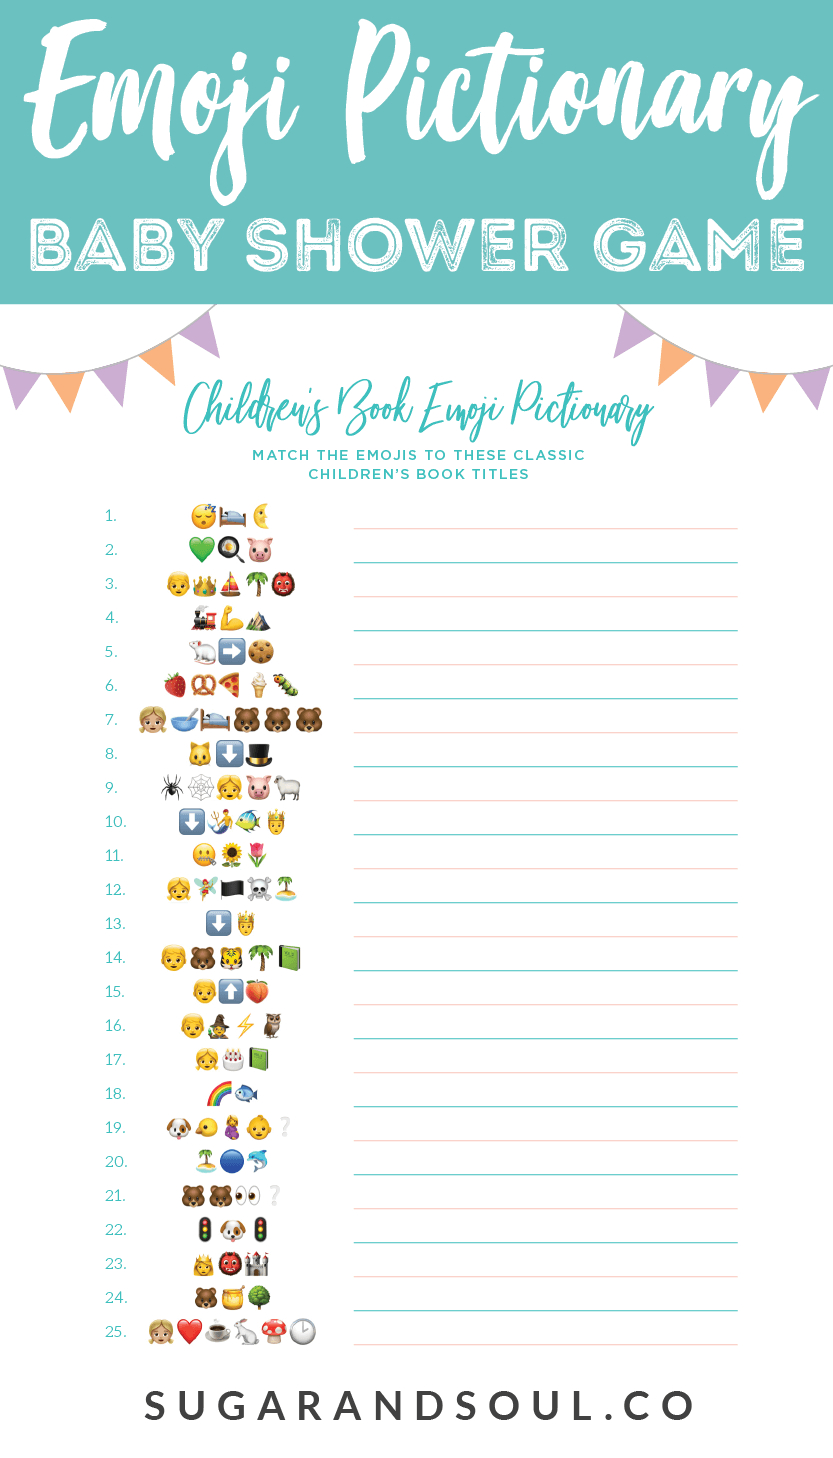 This Free Emoji Pictionary Baby Shower Game Printable Uses Emoji - Free Printable Online Baby Shower Games